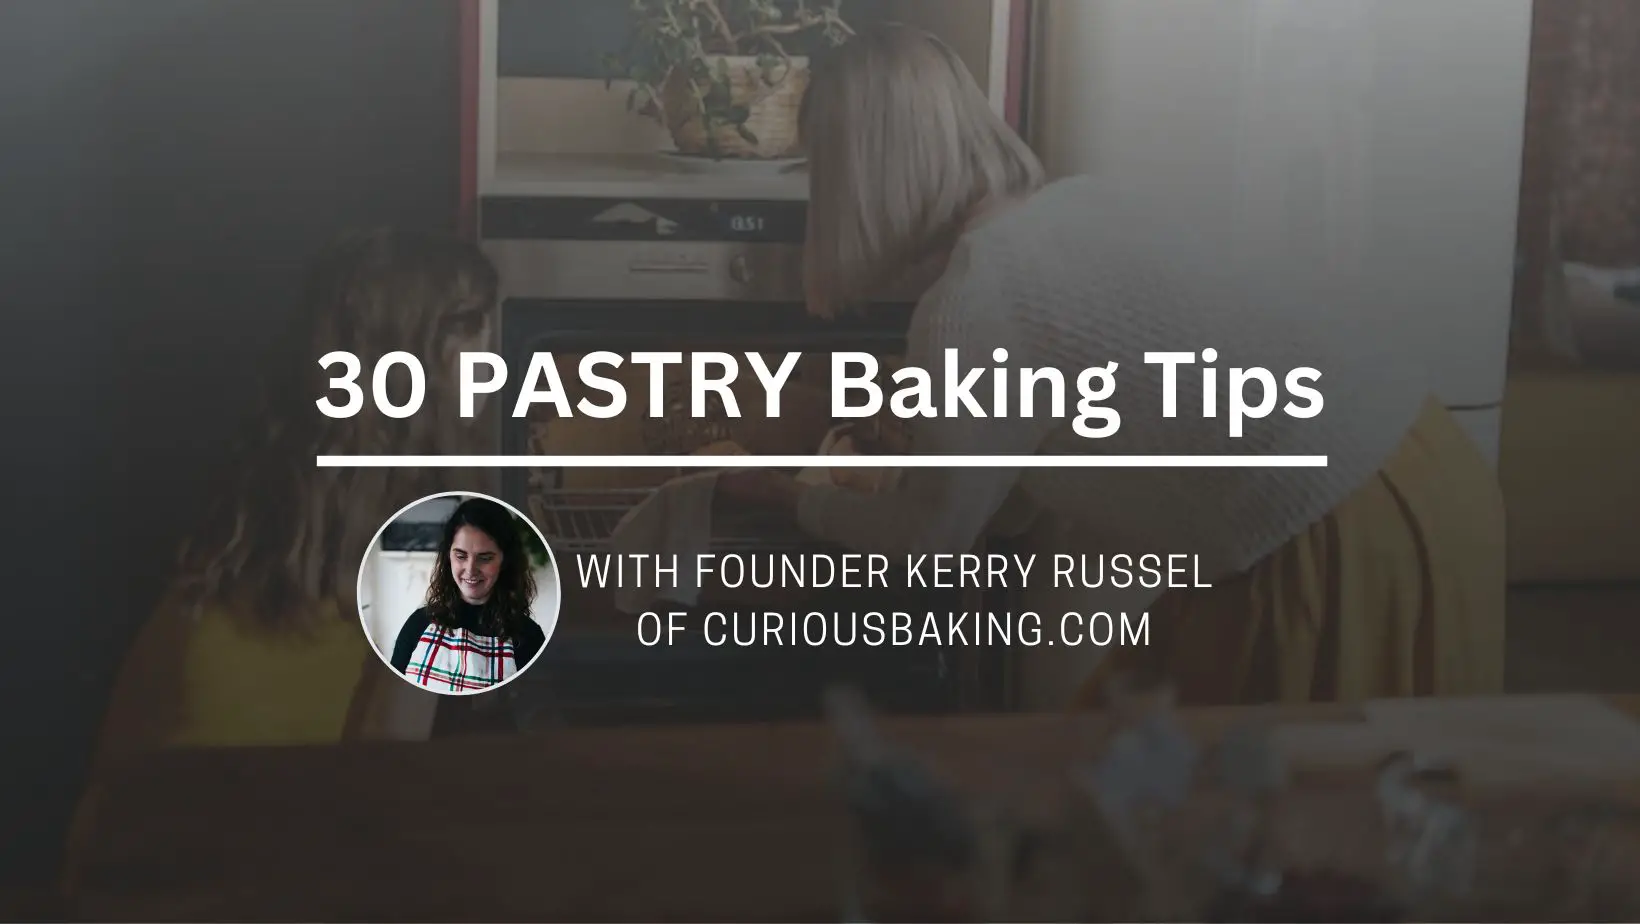 30 Pastry Baking Tips by CuriousBaking.com